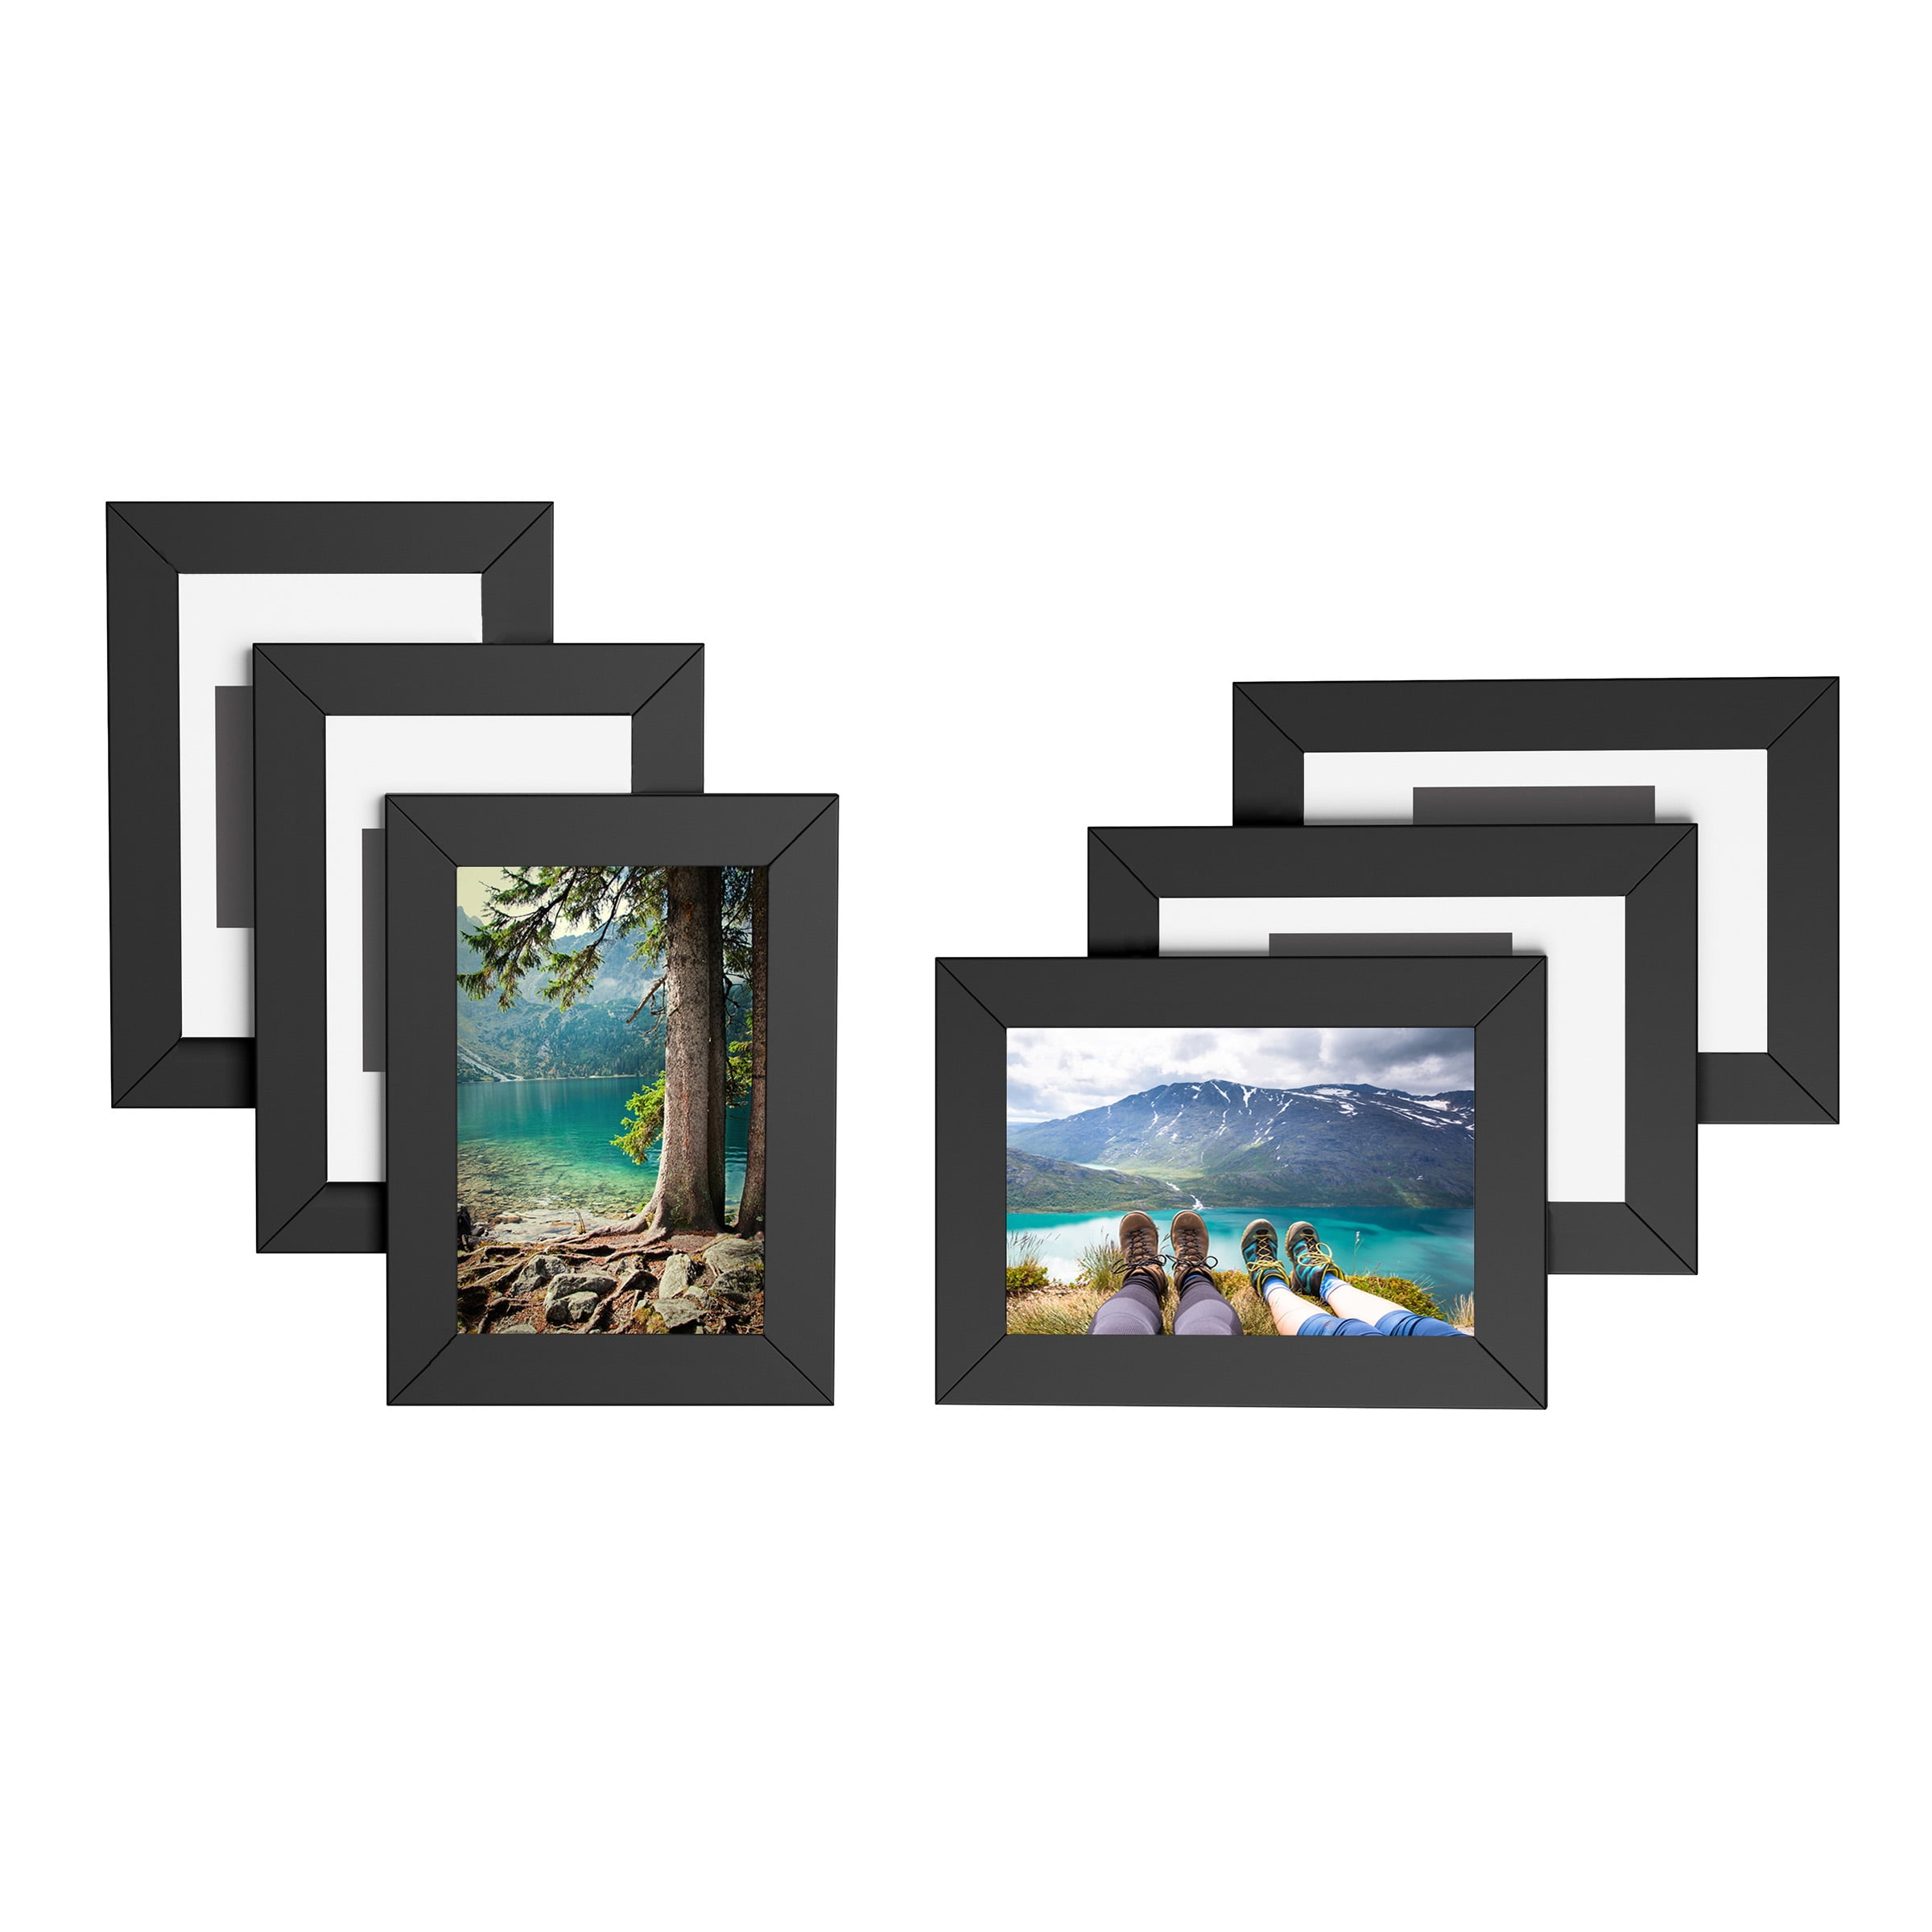 Complete Home Black Gallery Frame 4x6 4 inch x 6 inch Black